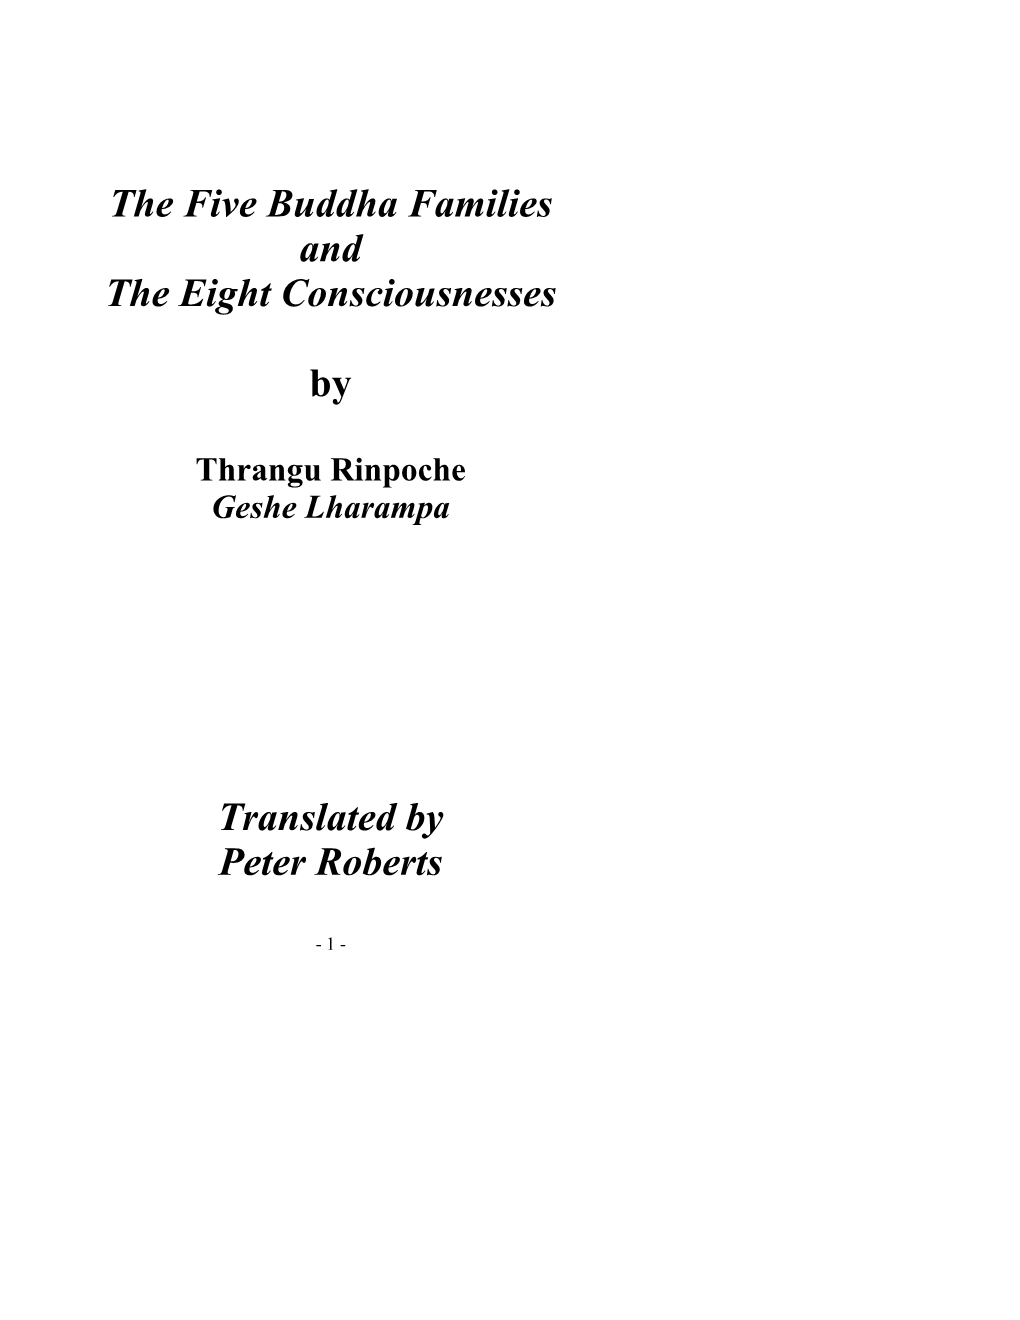 The Five Buddha Families and the Eight Consciousnesses By